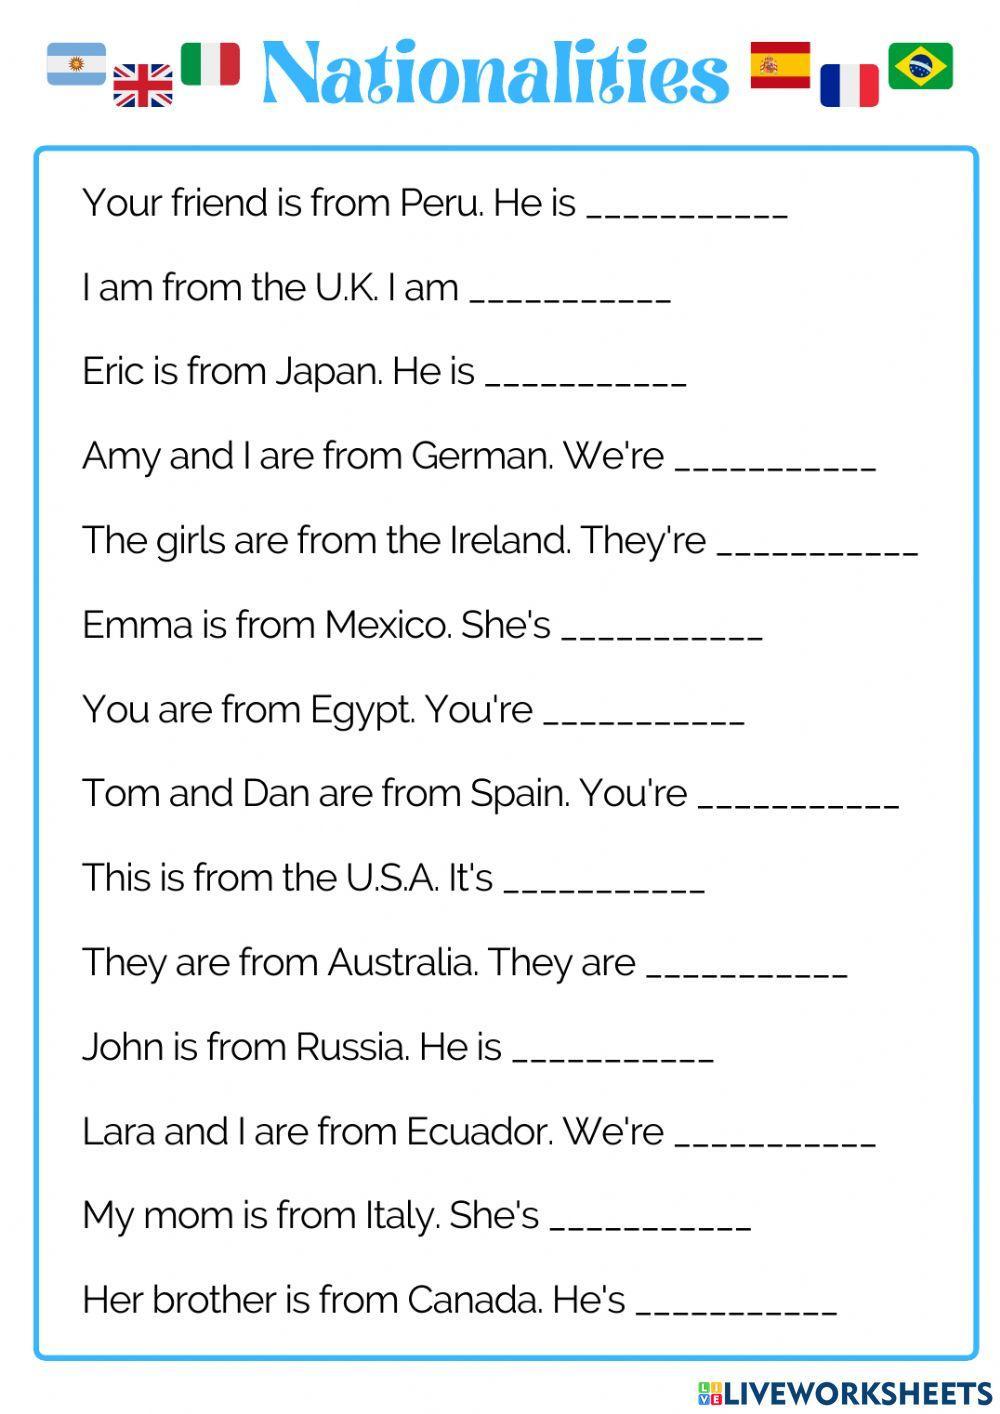 Nationalities. Where are you from?